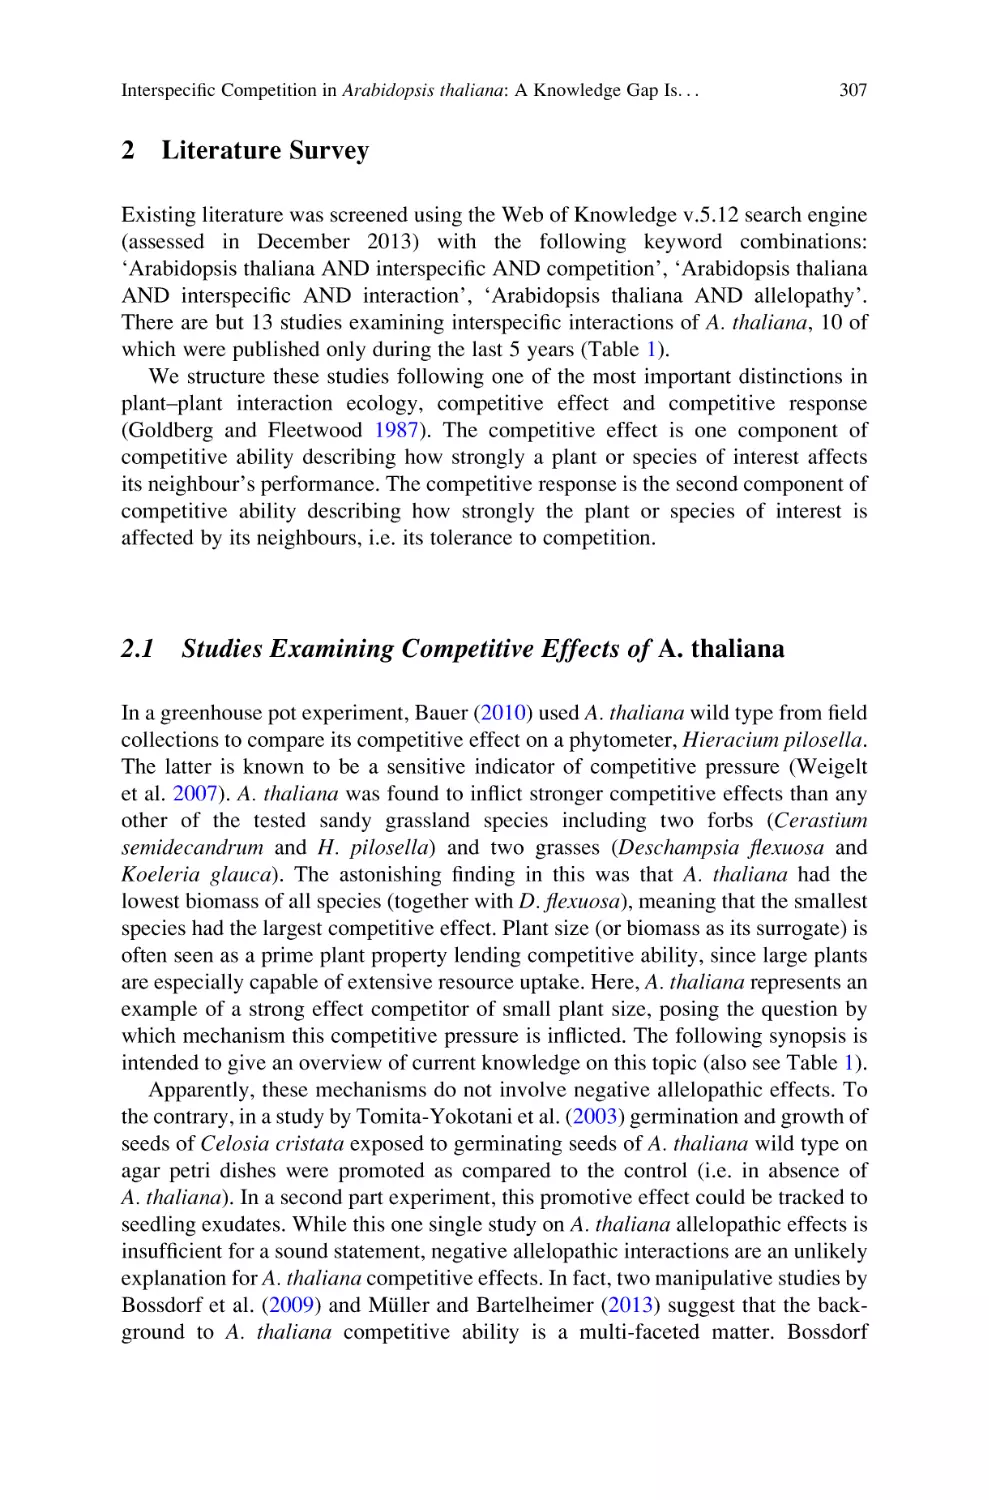 2 Literature Survey
2.1 Studies Examining Competitive Effects of A. thaliana